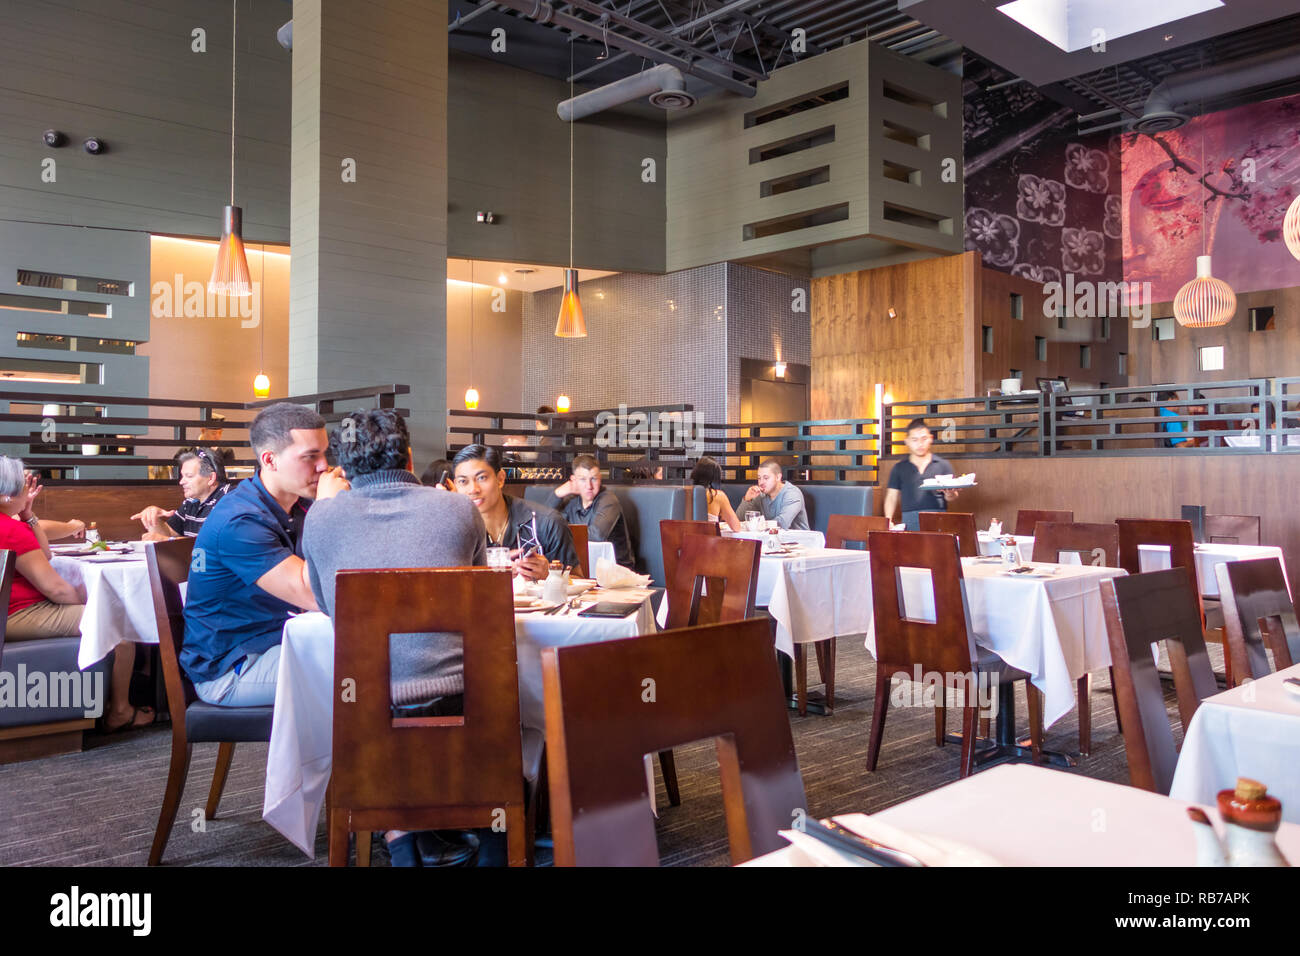 Interior of the Spoon & Fork Japanese-Thai restaurant in Toronto with people sitting and enjoying food. Stock Photo